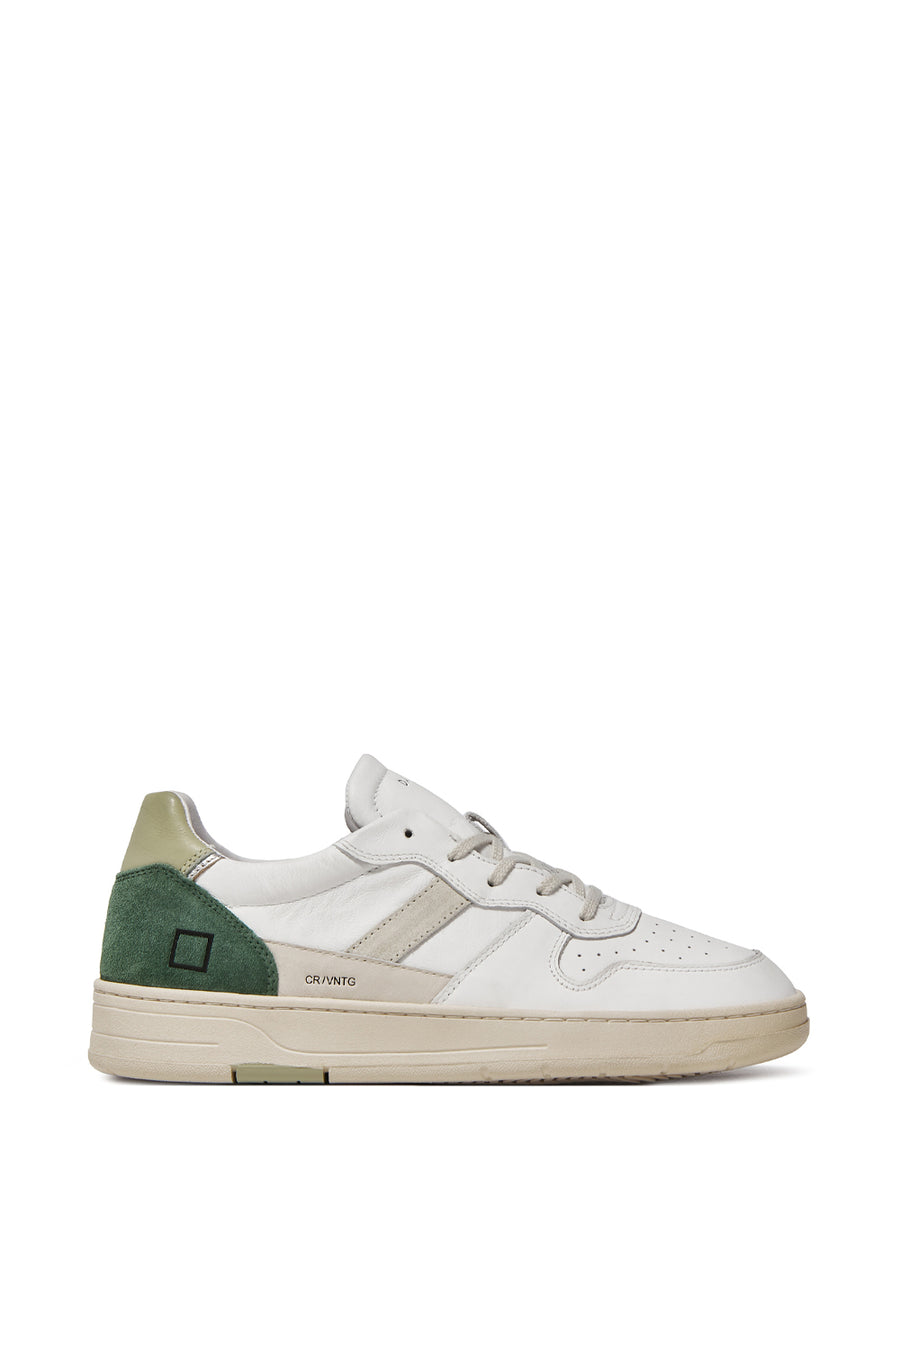 Buy the D.A.T.E. Court 2.0 Vintage Calf Sneaker in White/Green at Intro. Spend £50 for free UK delivery. Official stockists. We ship worldwide.